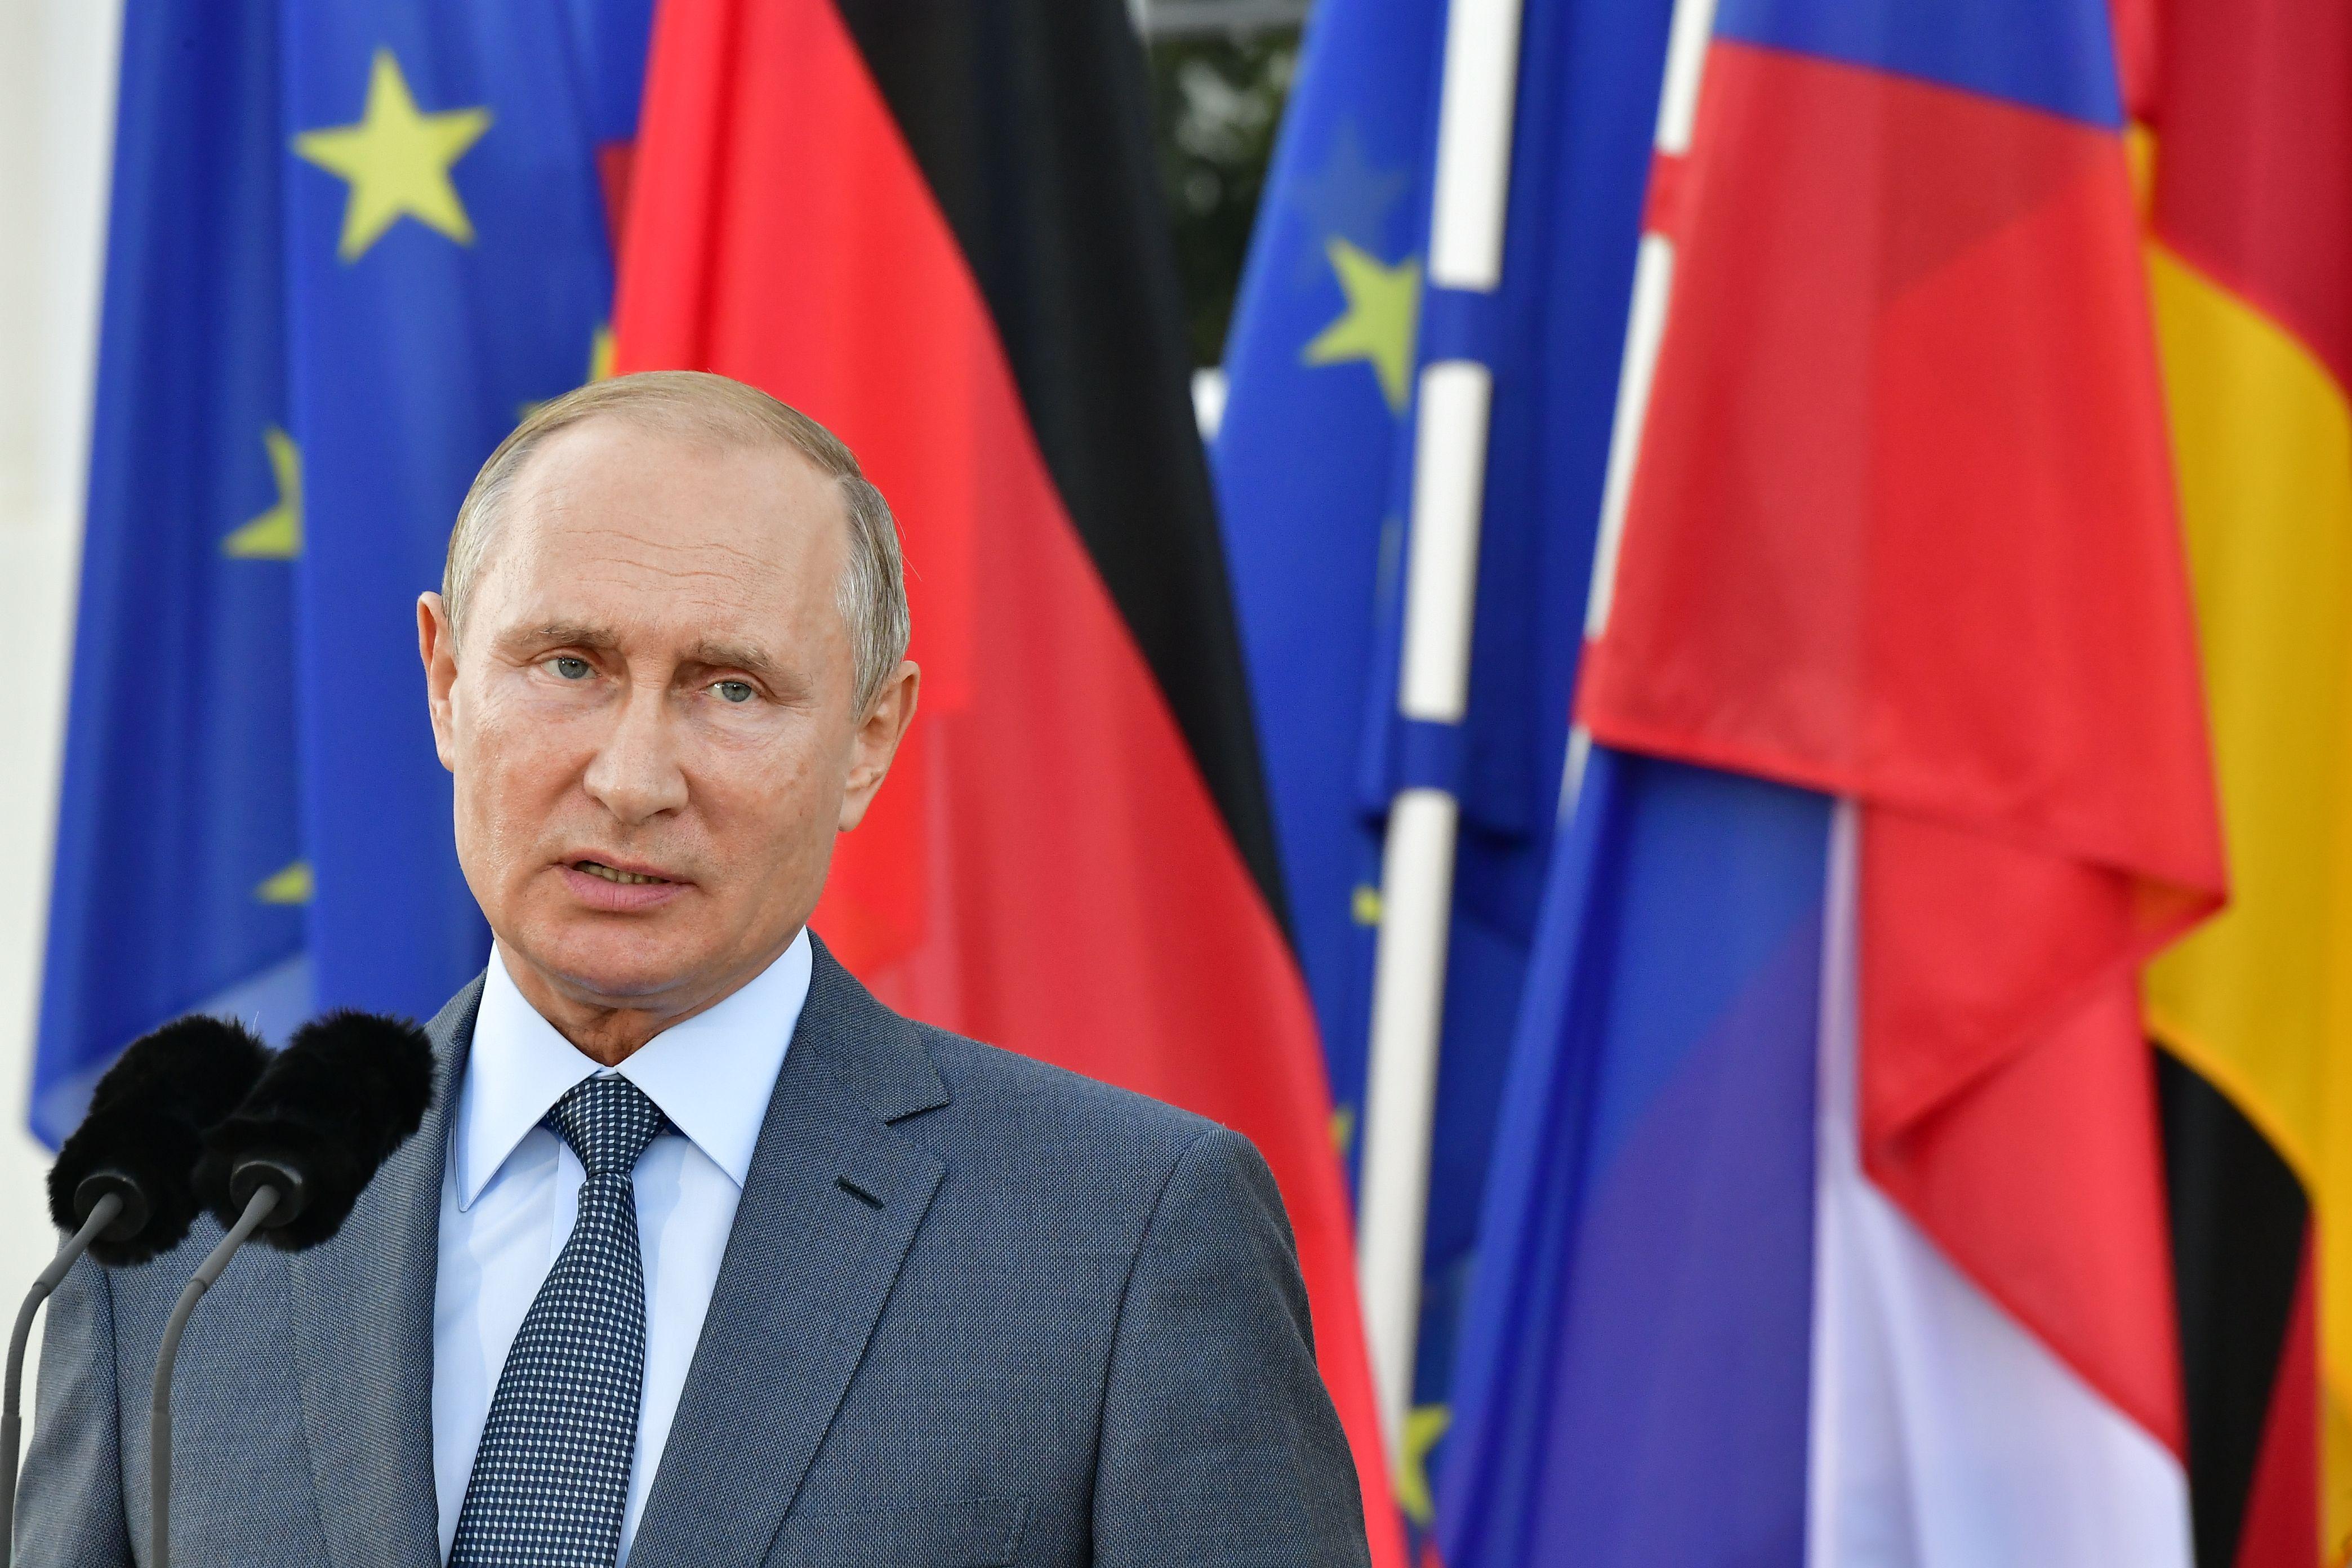 Russian President Vladimir Putin stands behind a microphone and in front of a backdrop of flags